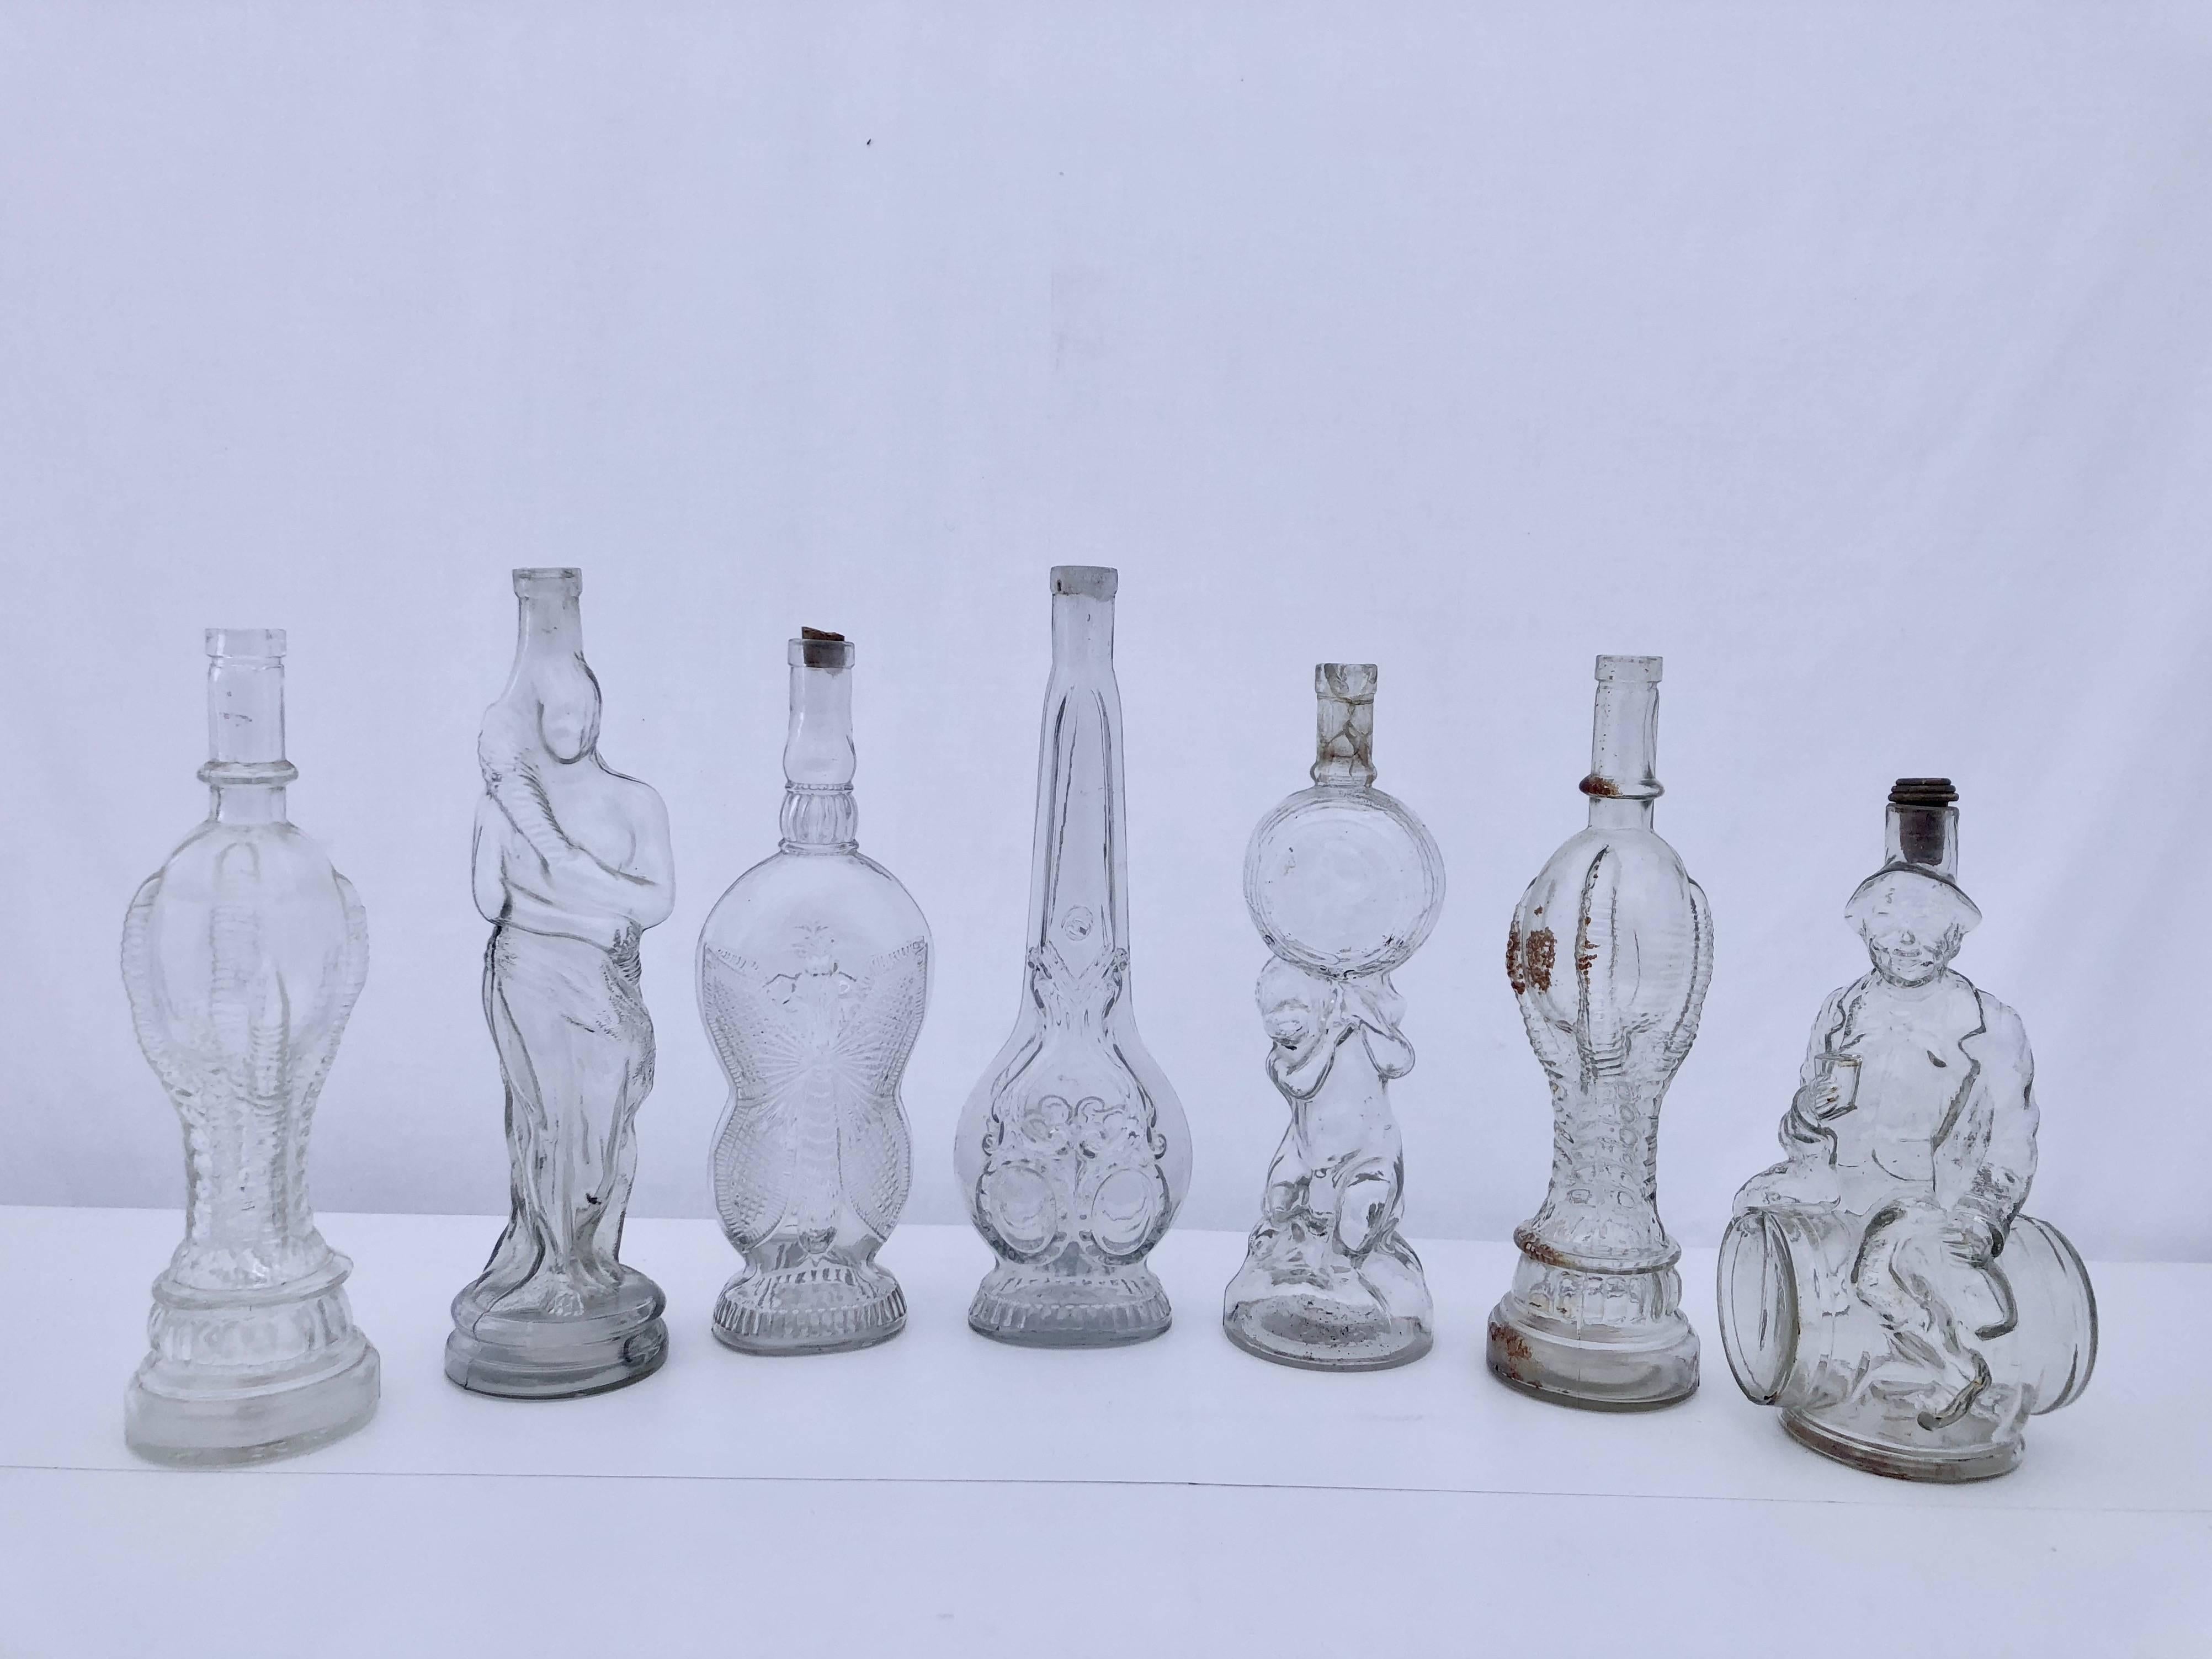 This is a fun collection of 13 antique French collectible glass bottles in a variety of figures. All are transparent glass except one which is a pale pink colored glass.
The collection consists of:
Six bottles are in the shape of people
Two